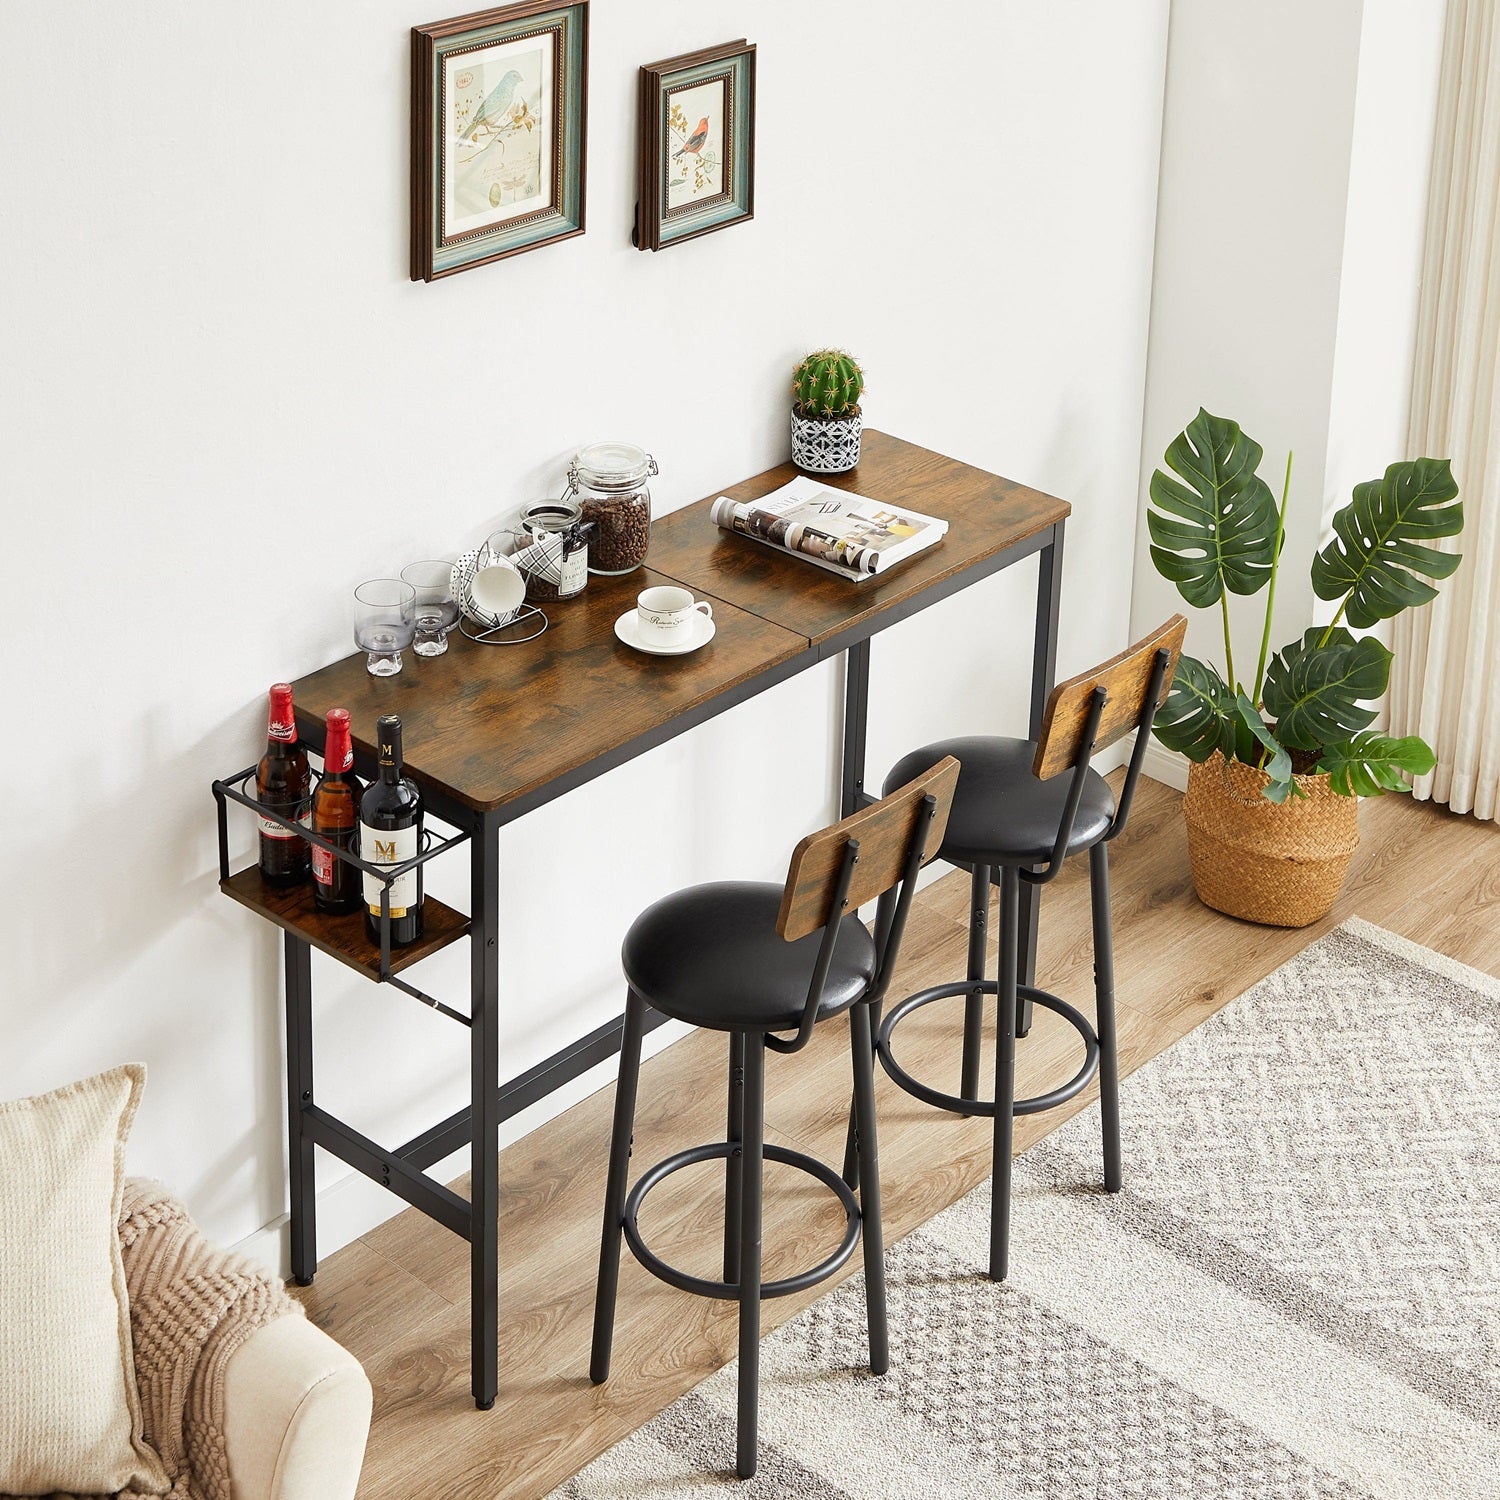 1st Choice Furniture Direct Bar Table Set 1st Choice Rustic Brown Bar Table Set with Wine Bottle Storage